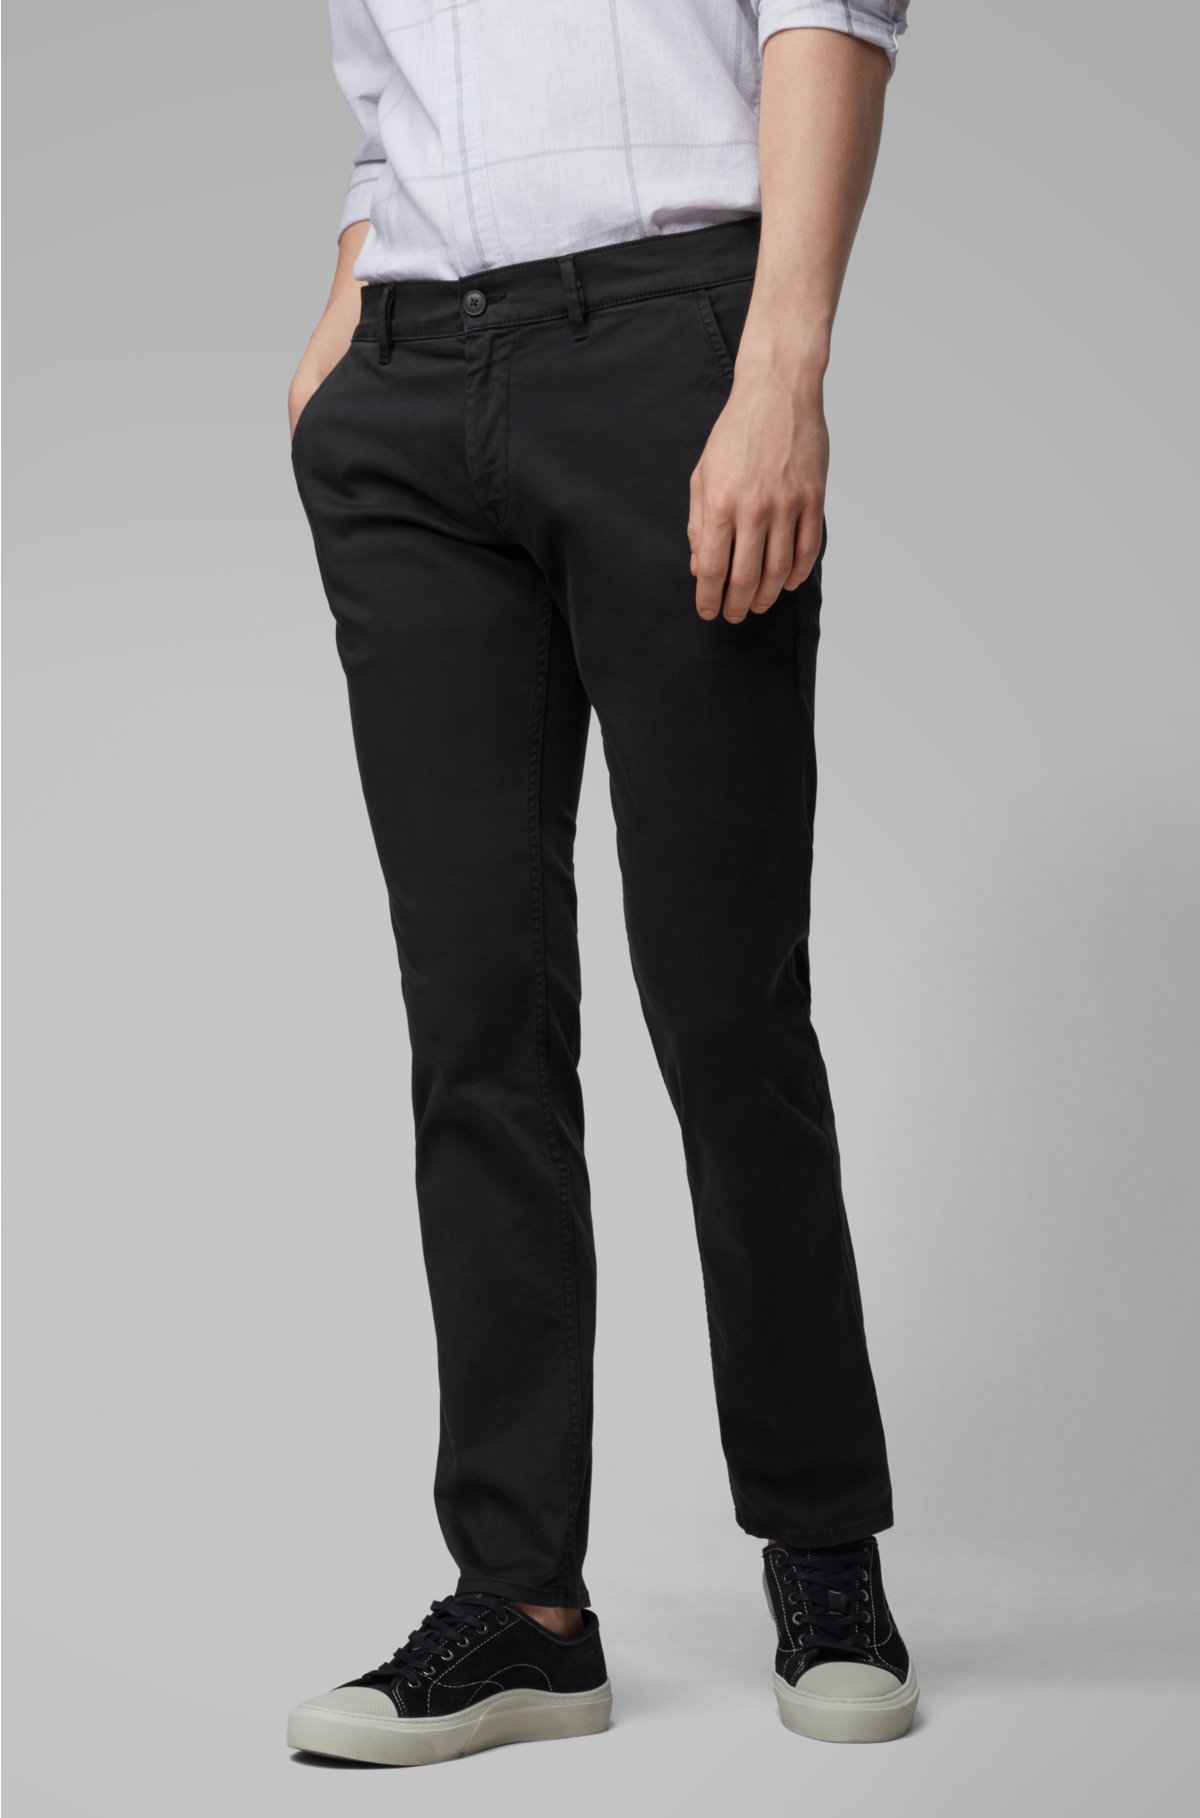 Forekomme Perversion Bevidst BOSS - Slim-fit casual chinos in brushed stretch cotton